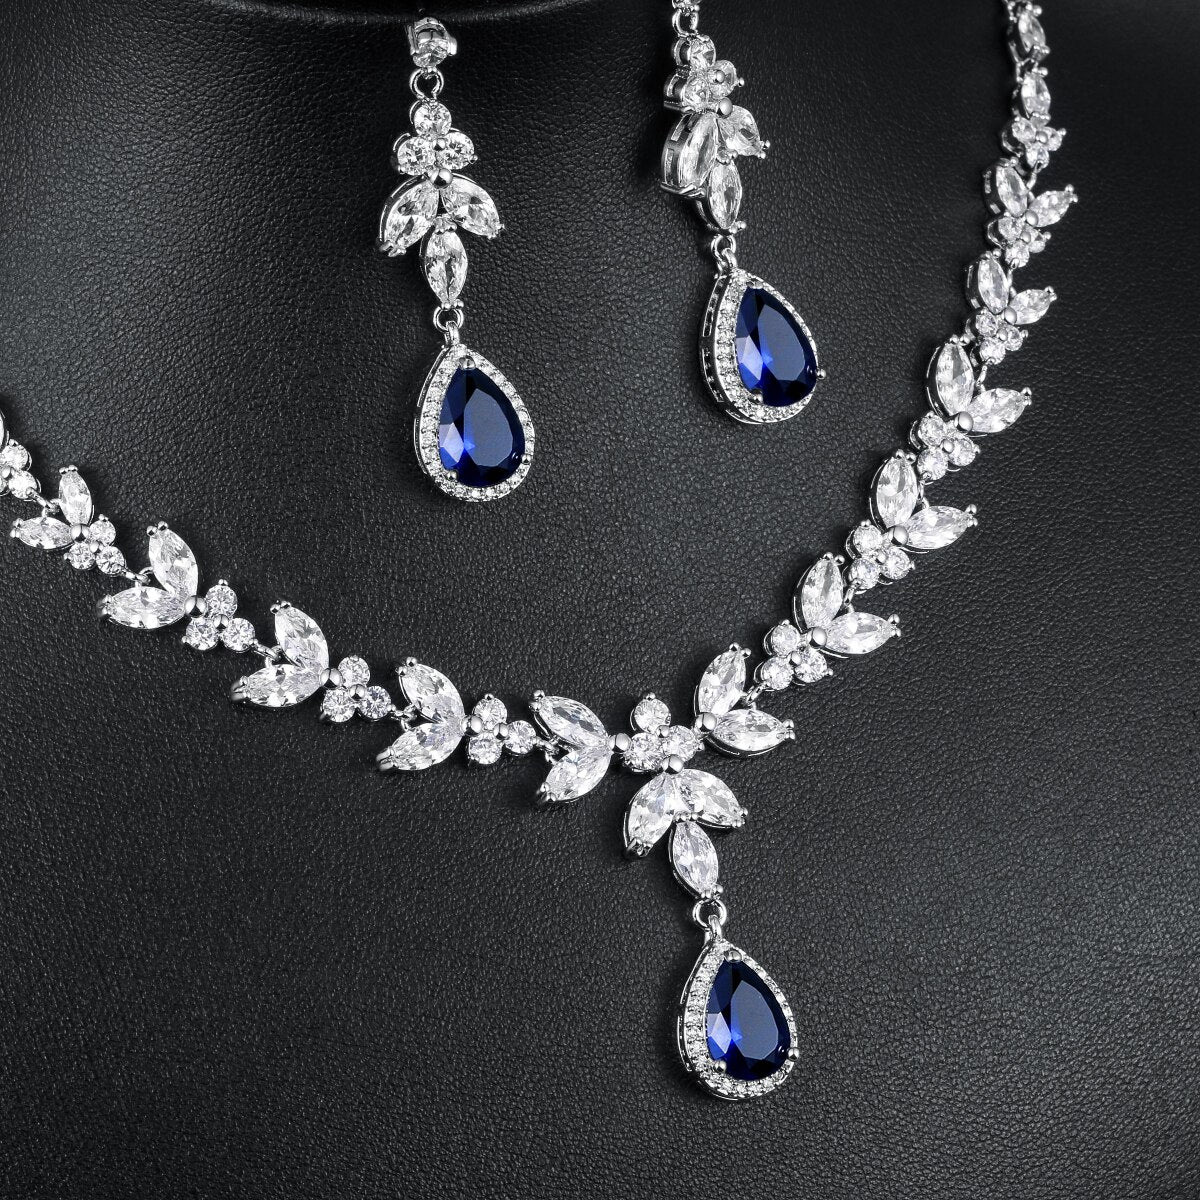 Blue Teardrop and Marquise Cut Jewelry Set